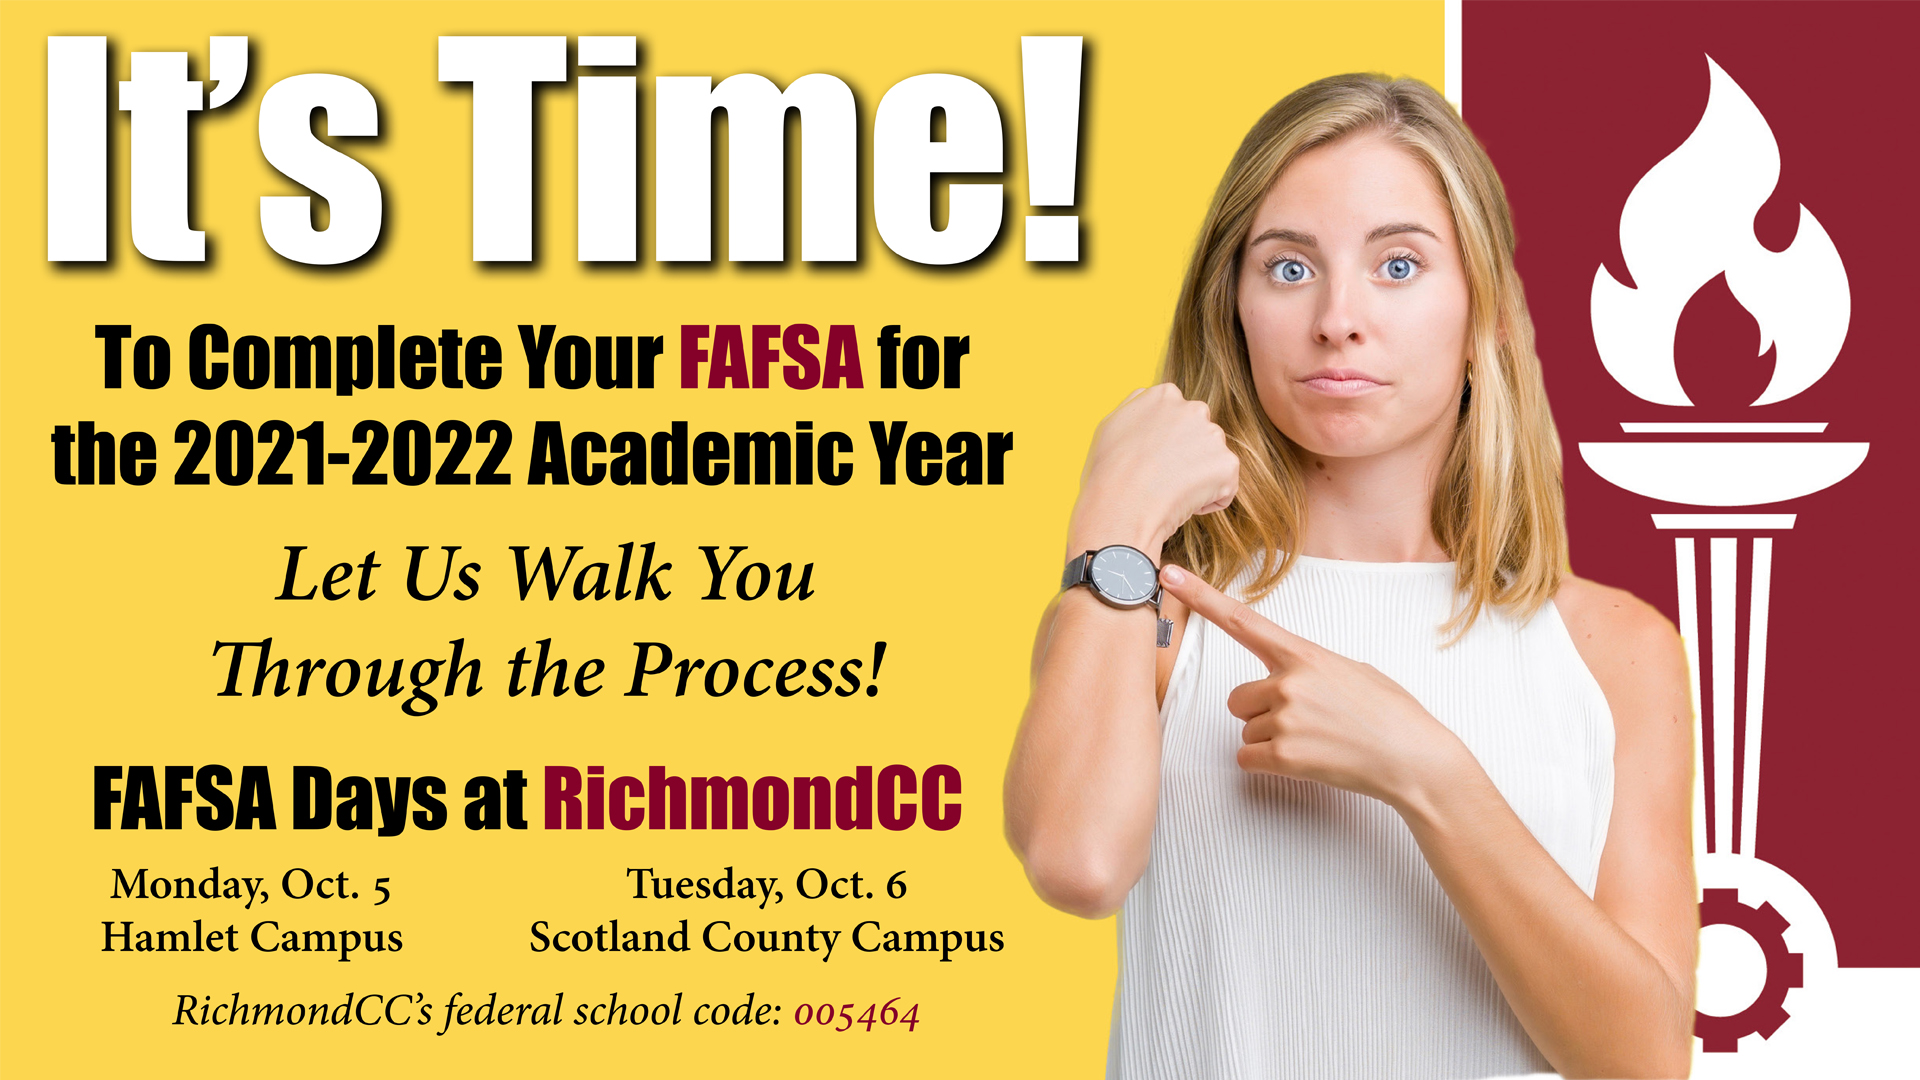 It's Time to Complete the FAFSA for 2021-2022 Academic Year. FAFSA Days at RichmondCC are Oct. 5 and Oct. 6.